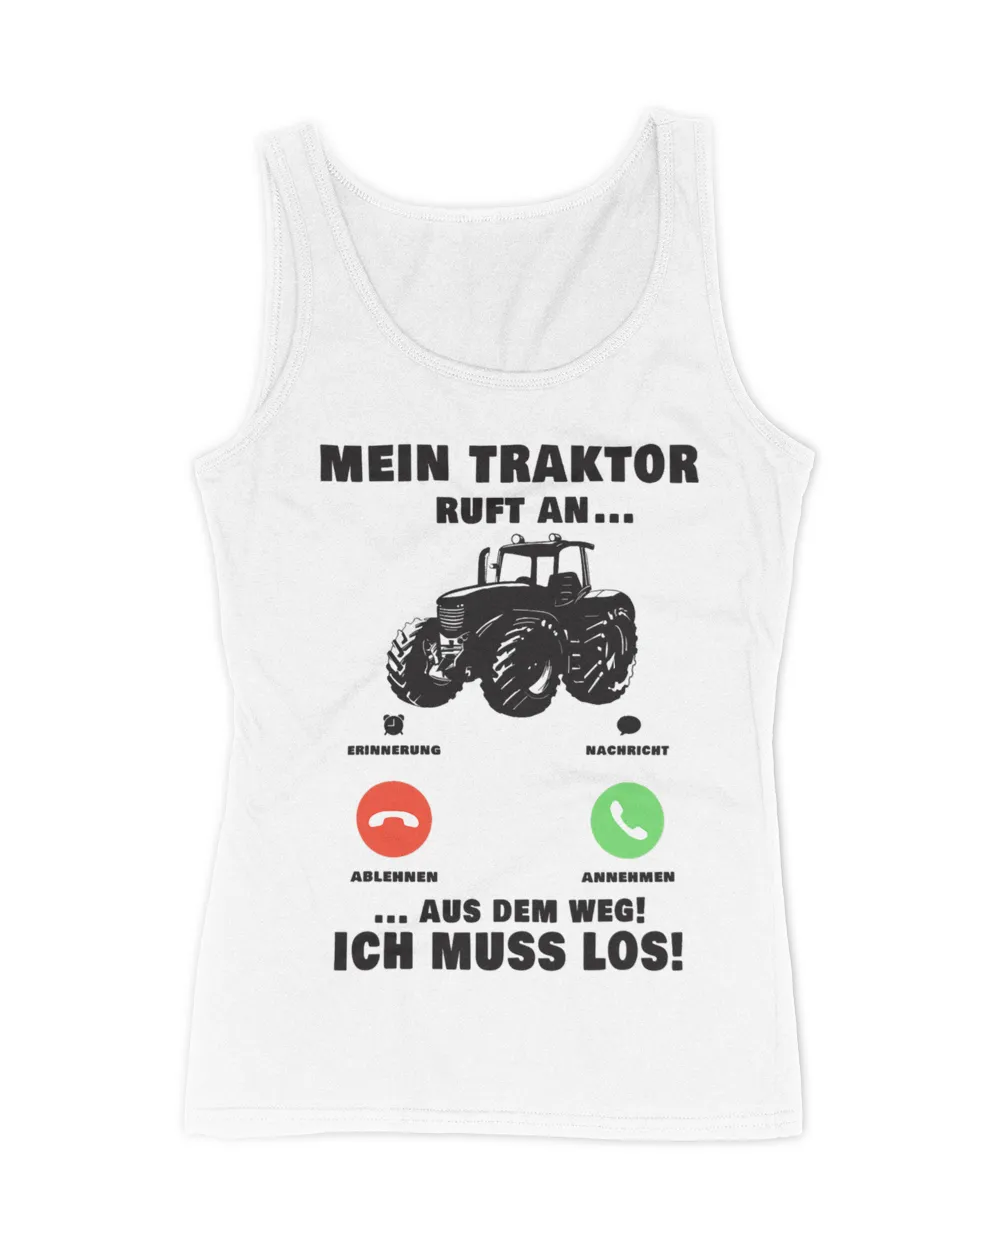 My tractor calls to tractor driver farmer